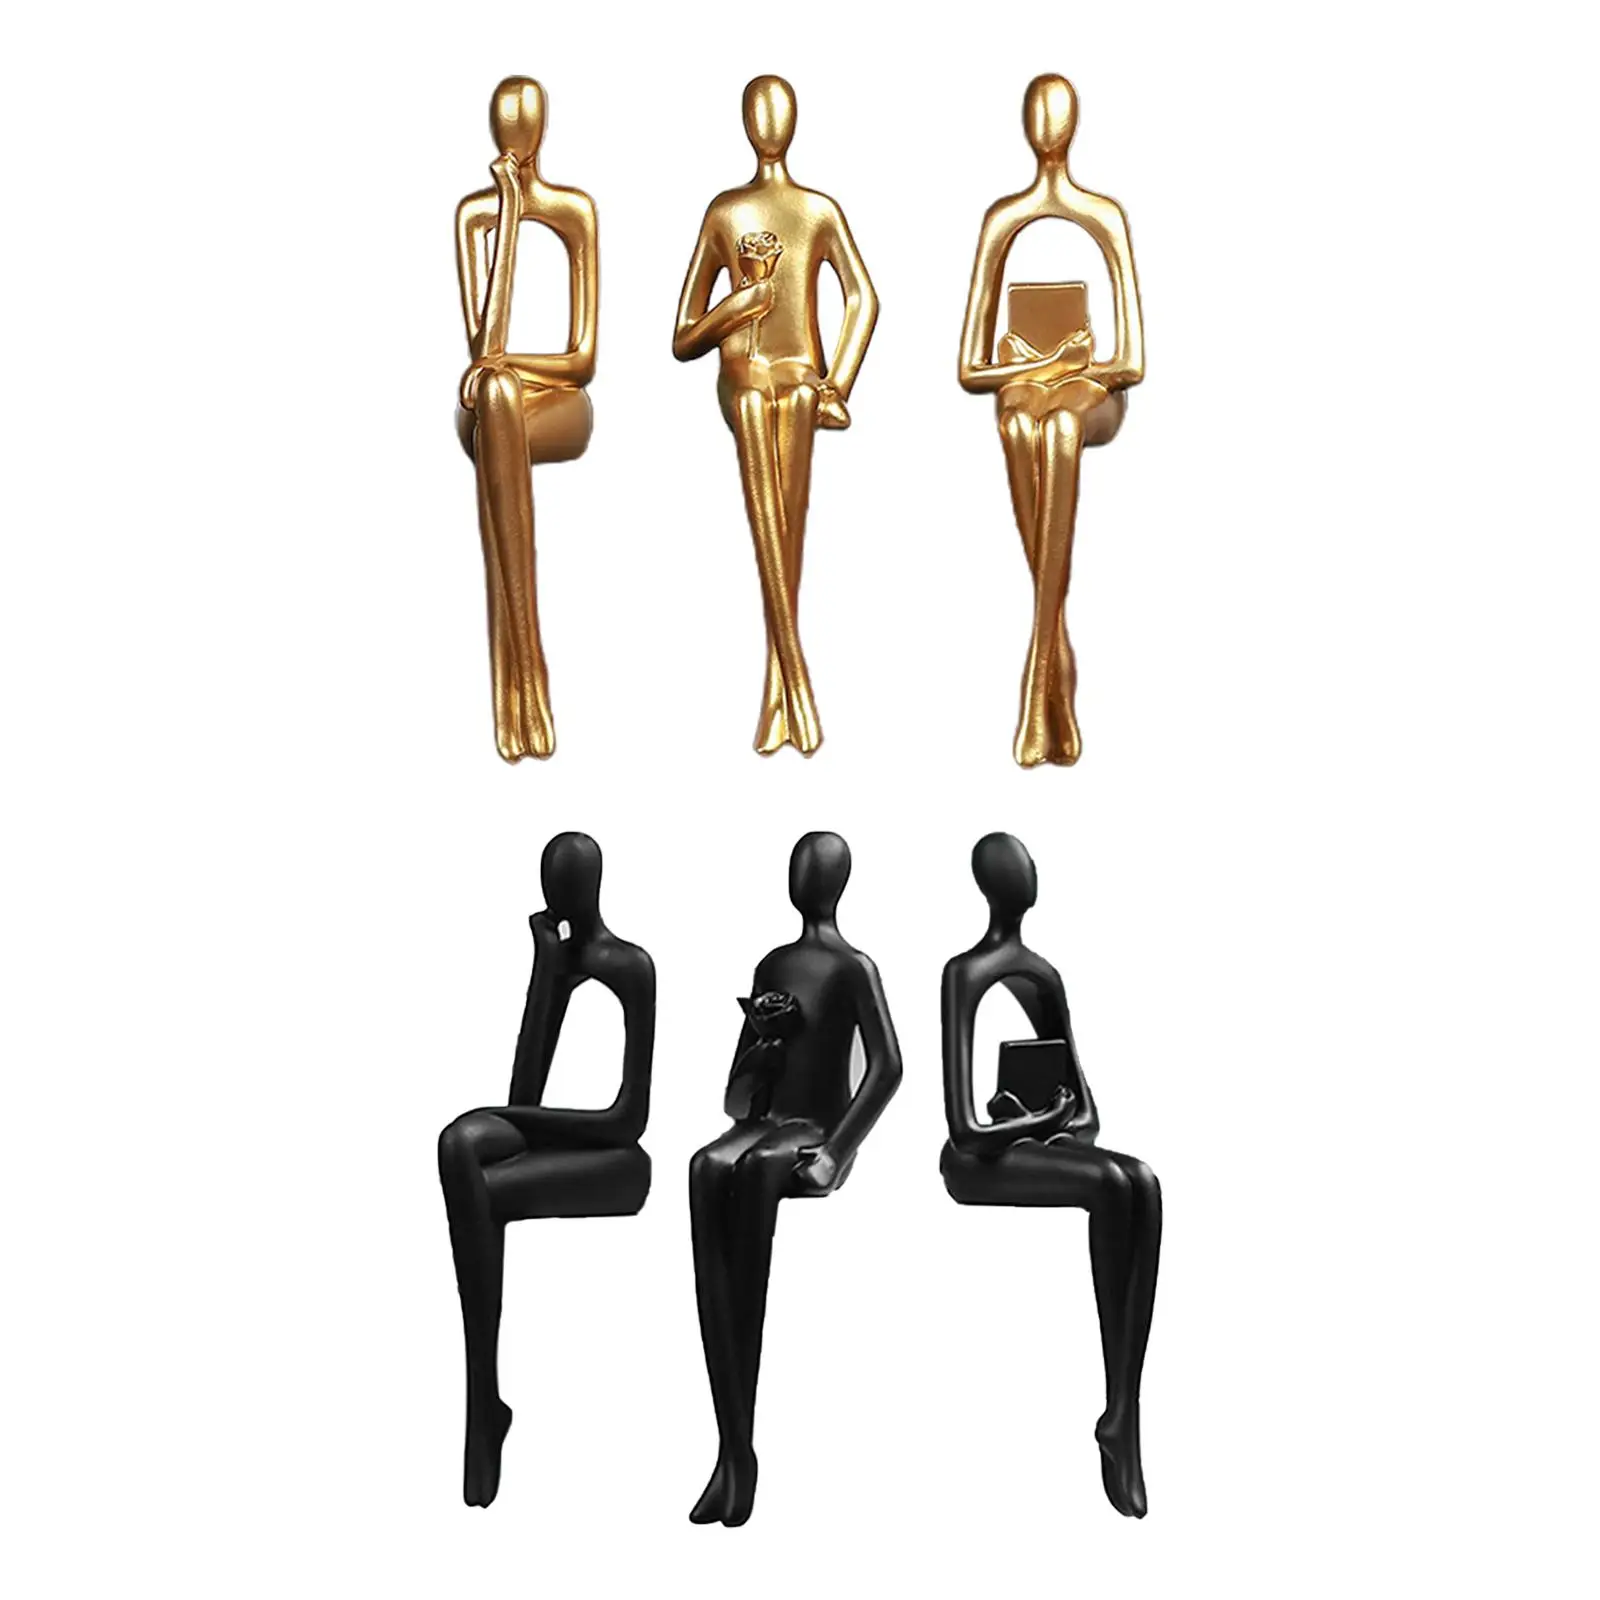 

3x Sitting Thinker Statues Art Ornaments Figurine Decor Accent Resin Sculptures for Desk Home Bookshelf Living Room Collectible